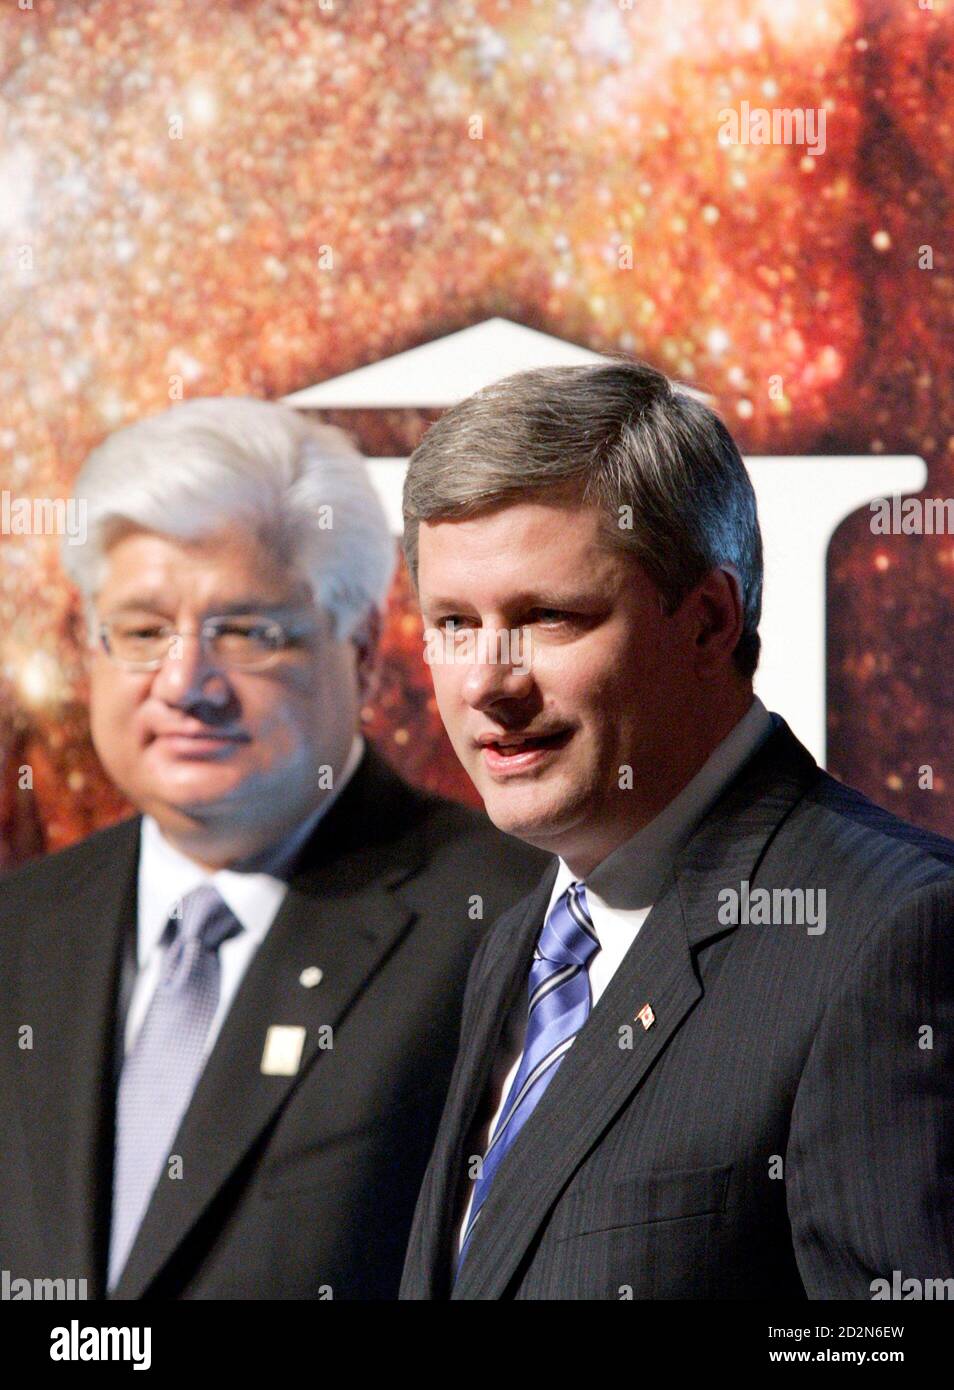 Canadian Prime Minister Stephen Harper (R) appears on stage with Research  in Motion Co-CEO Mike Lazaridis while announcing a funding boost for  science and technology at the Perimeter Institute for Theoretical Physics